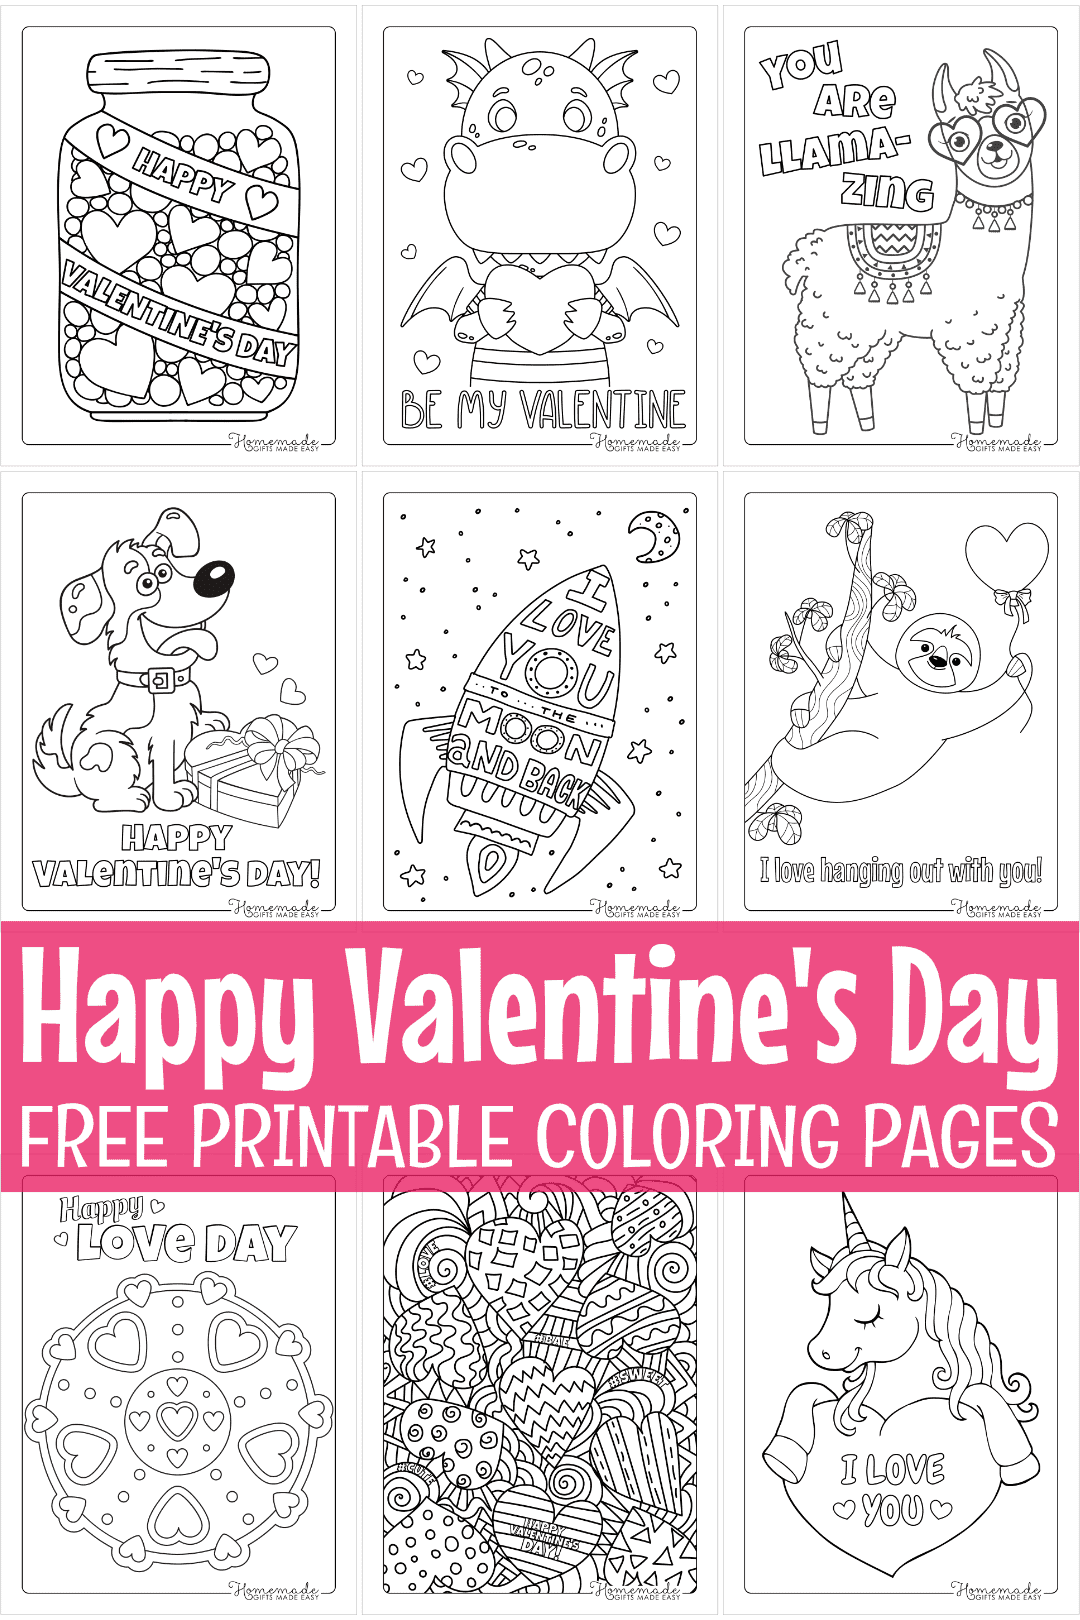 59 free printable valentine s day coloring pages